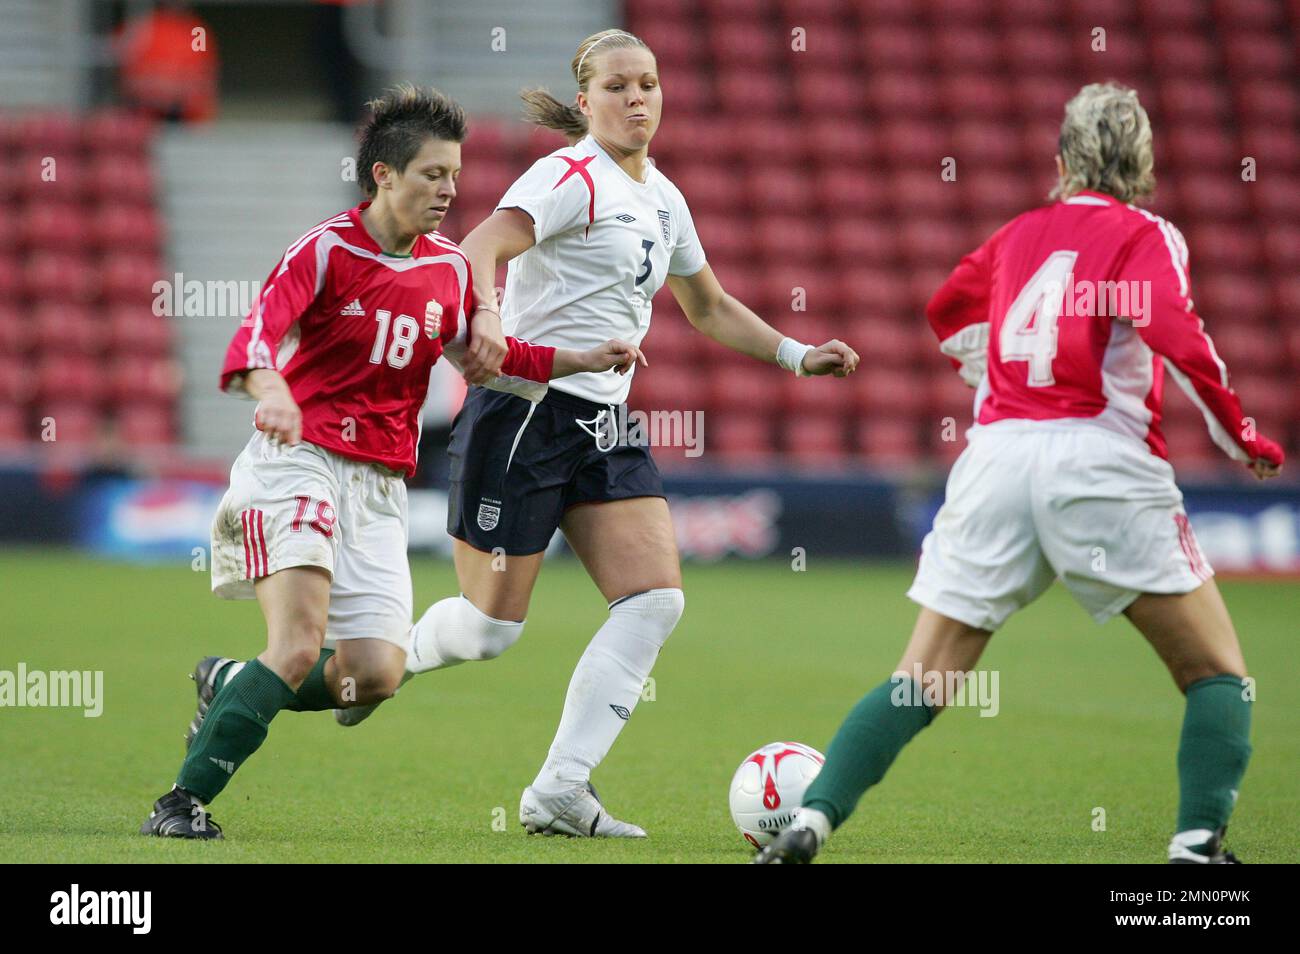 England v Hungary Women's football 2006 World Cup Qualifier  at St Marys stadium Southampton. Englands Rachel Unitt in action.  image is bound by Dataco restrictions on how it can be used. EDITORIAL USE ONLY No use with unauthorised audio, video, data, fixture lists, club/league logos or “live” services. Online in-match use limited to 120 images, no video emulation. No use in betting, games or single club/league/player publications Stock Photo